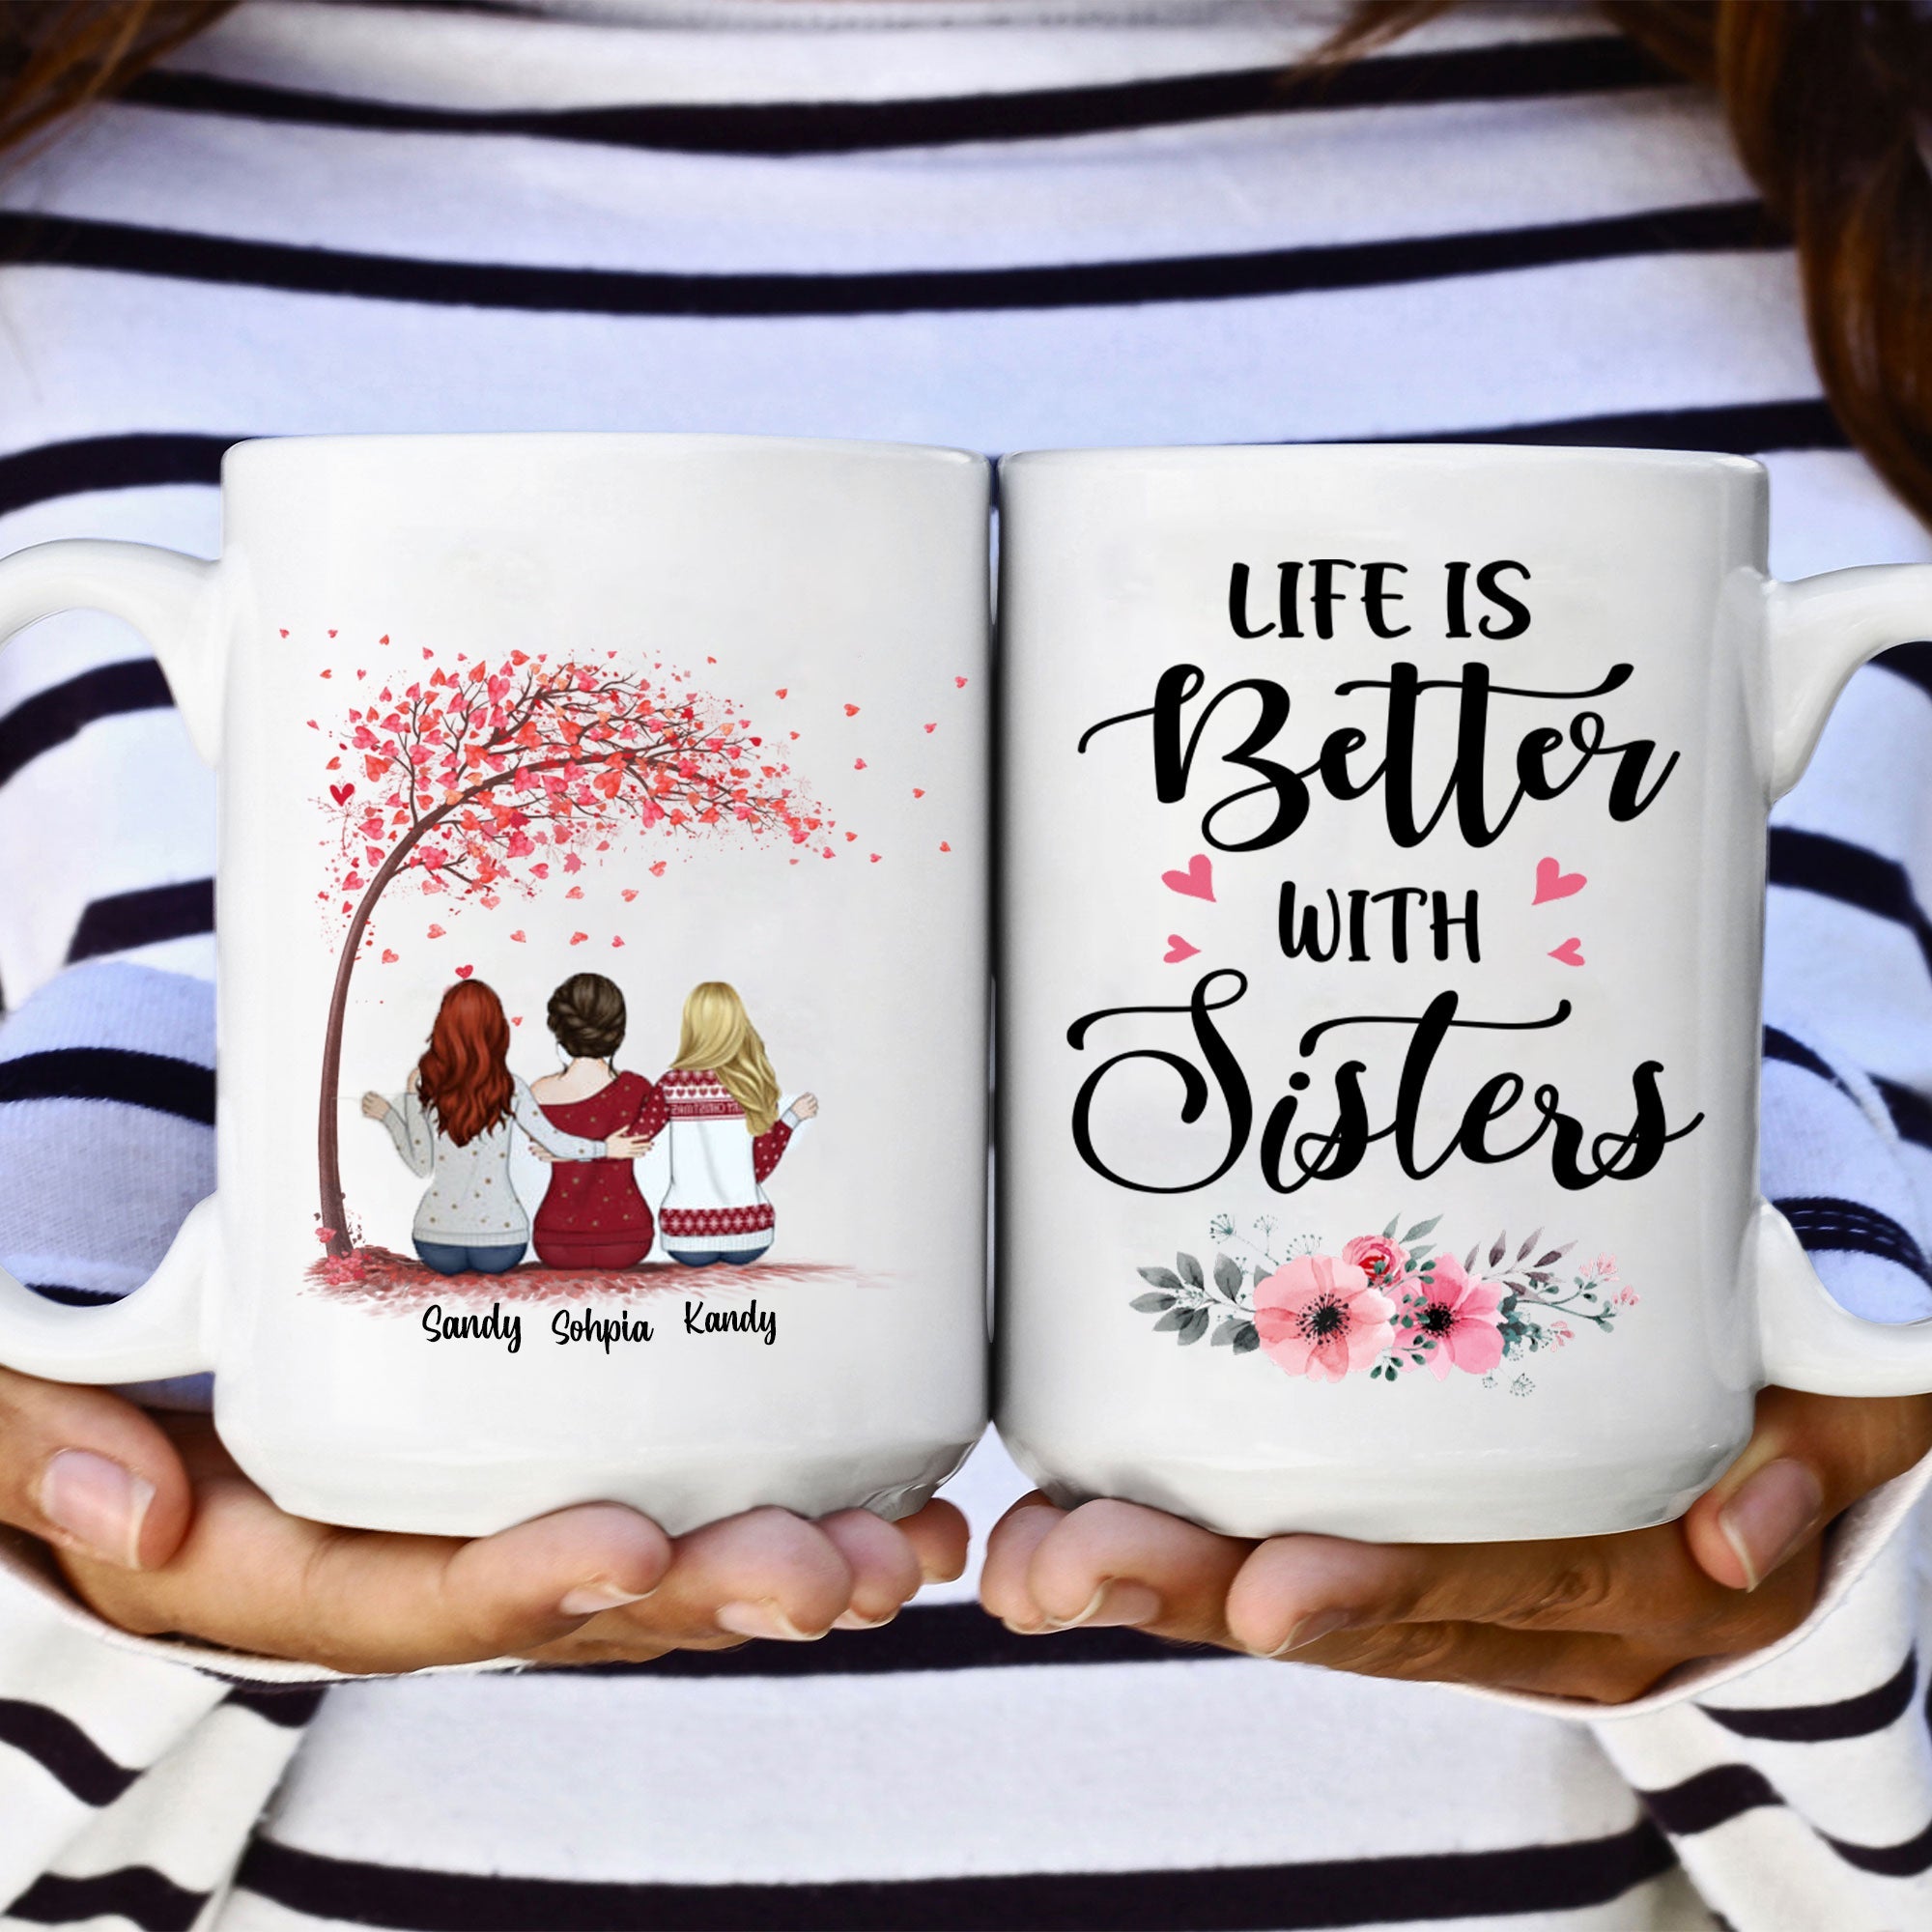 Life is better with Sisters - Love - Personalized Mug